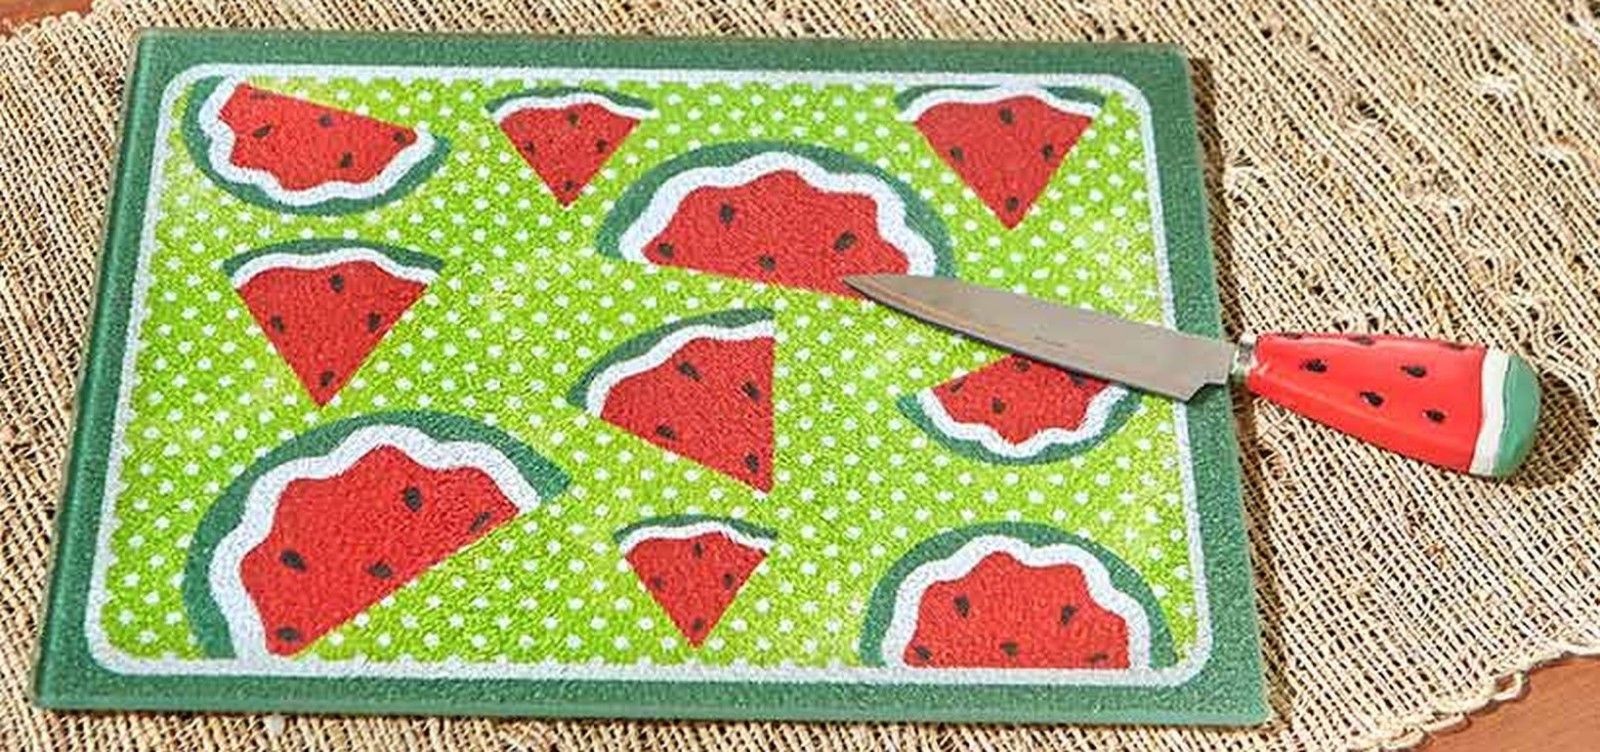 Set of Glass Cutting Board (app. 11"x 8.5") & Matching Knife, WATERMELONS, rect. - $14.84